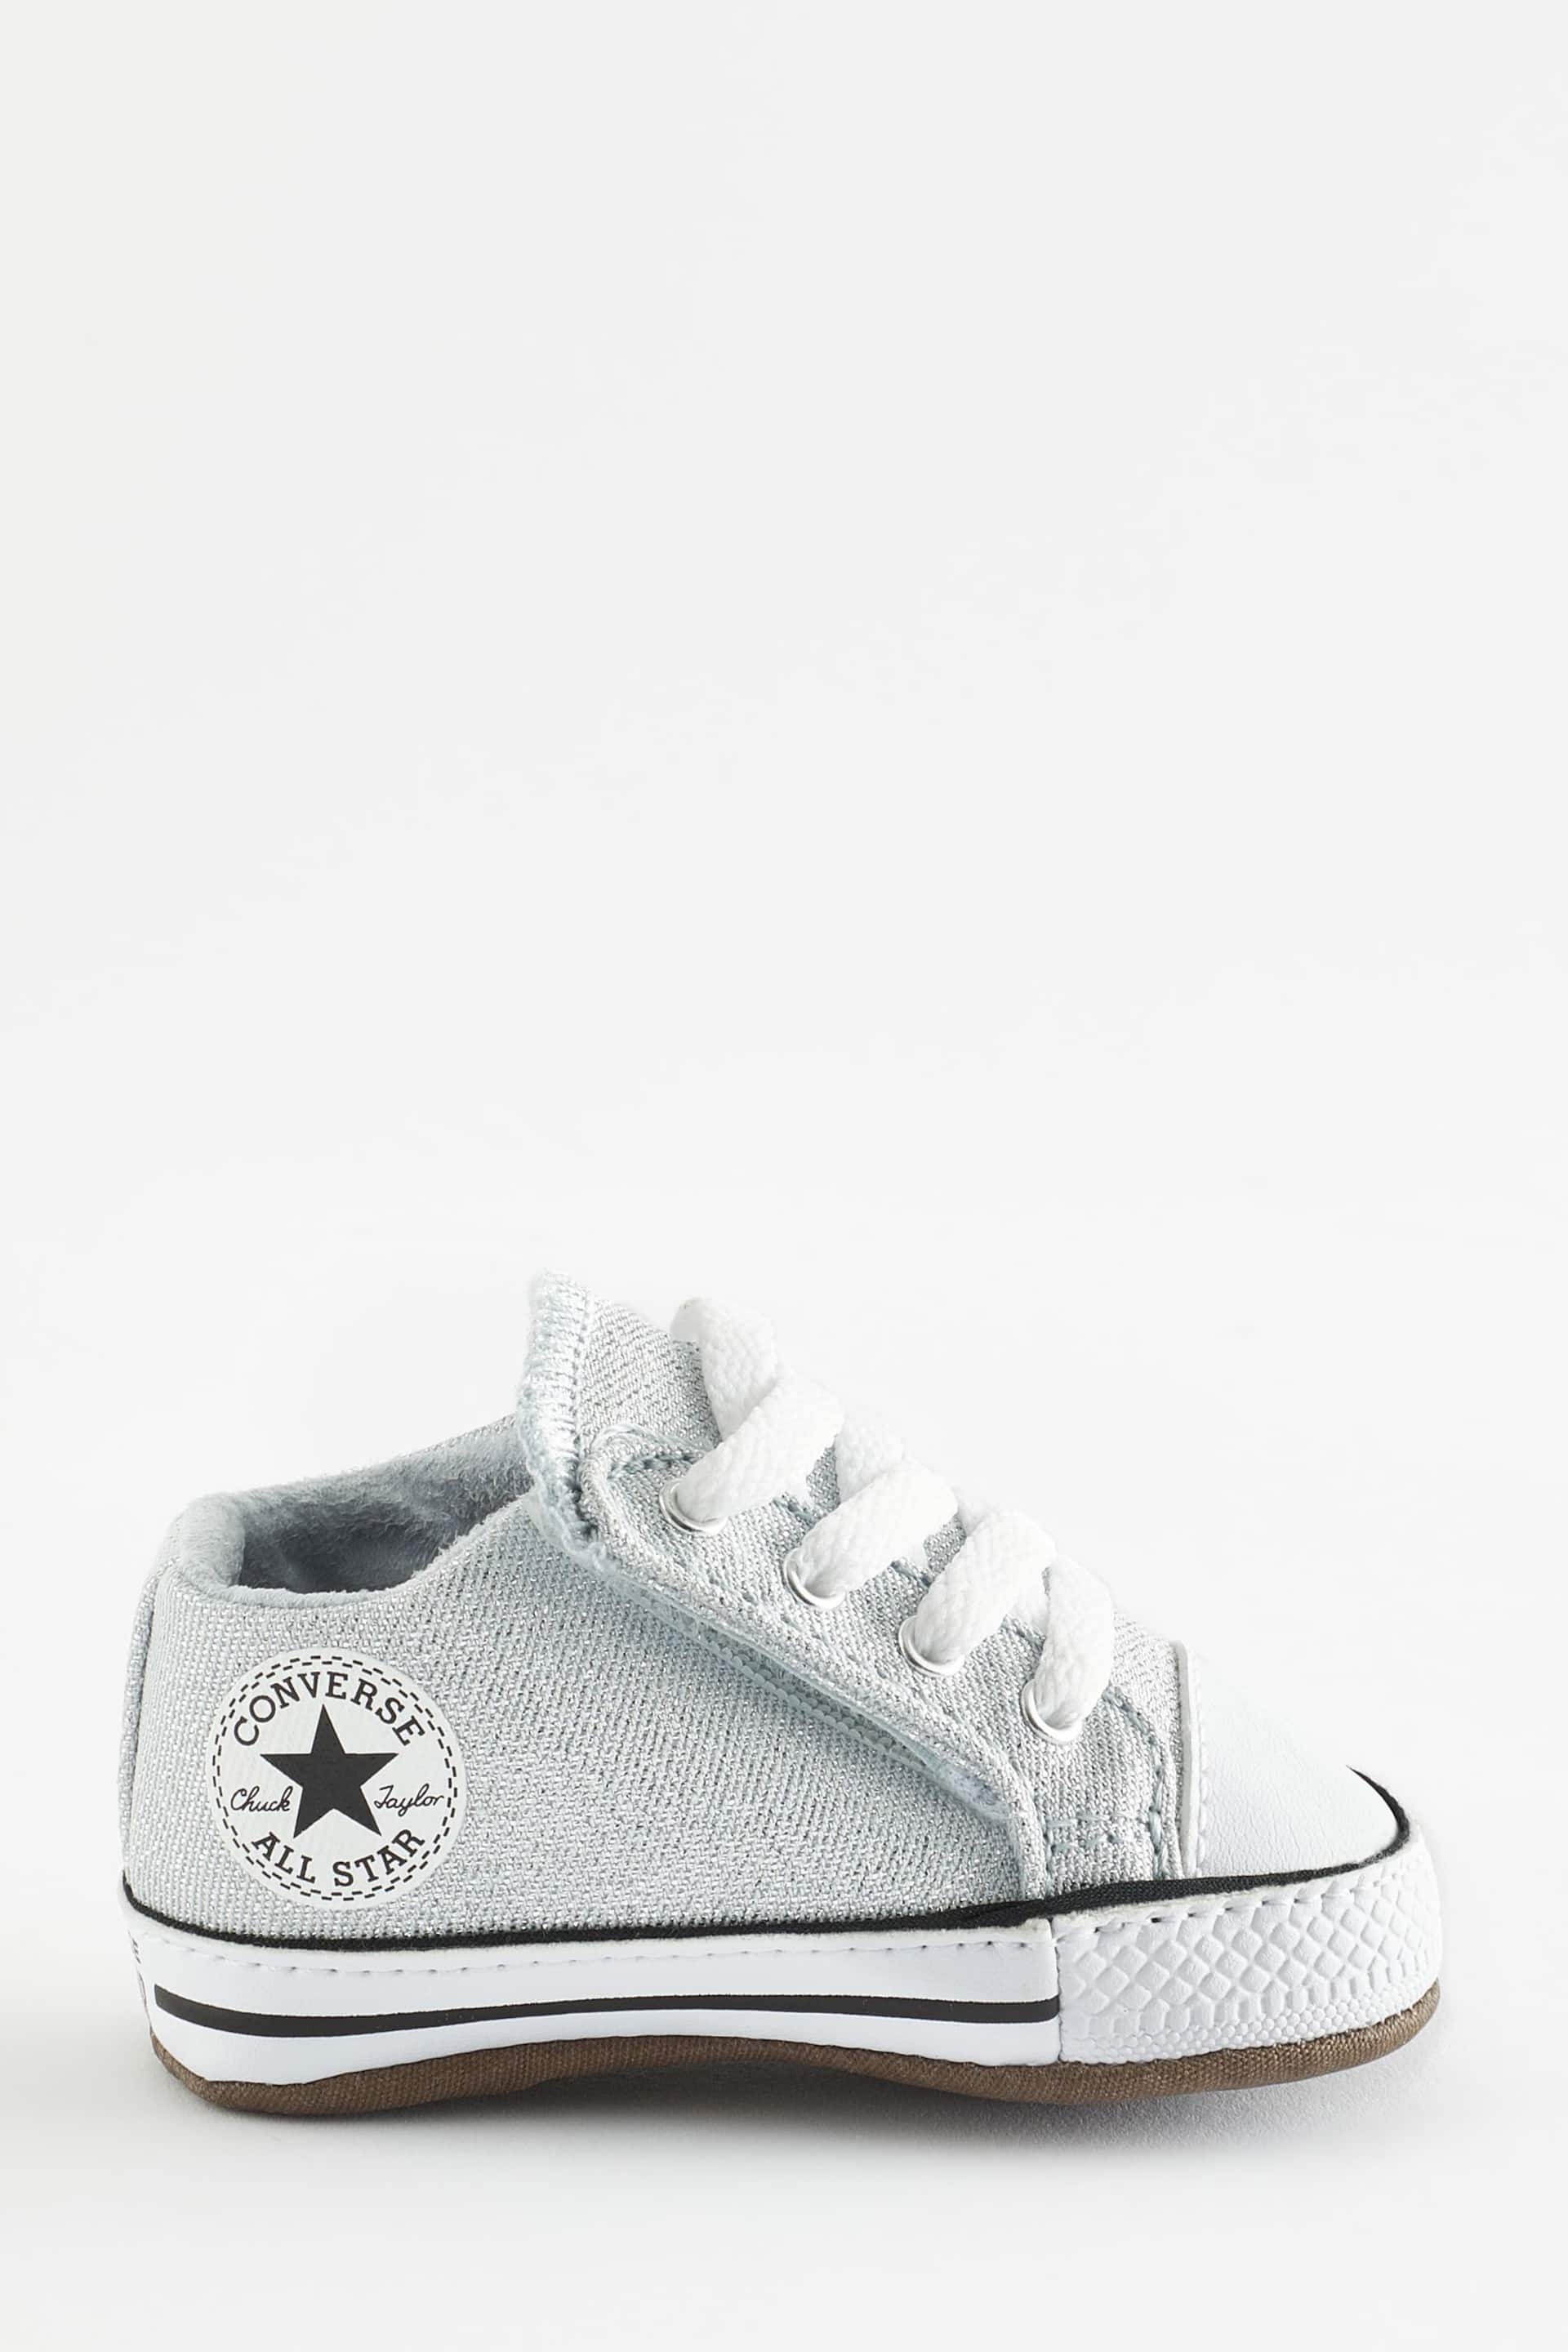 Converse White Chuck Taylor All Star Glitter Pram Shoes - Image 1 of 9